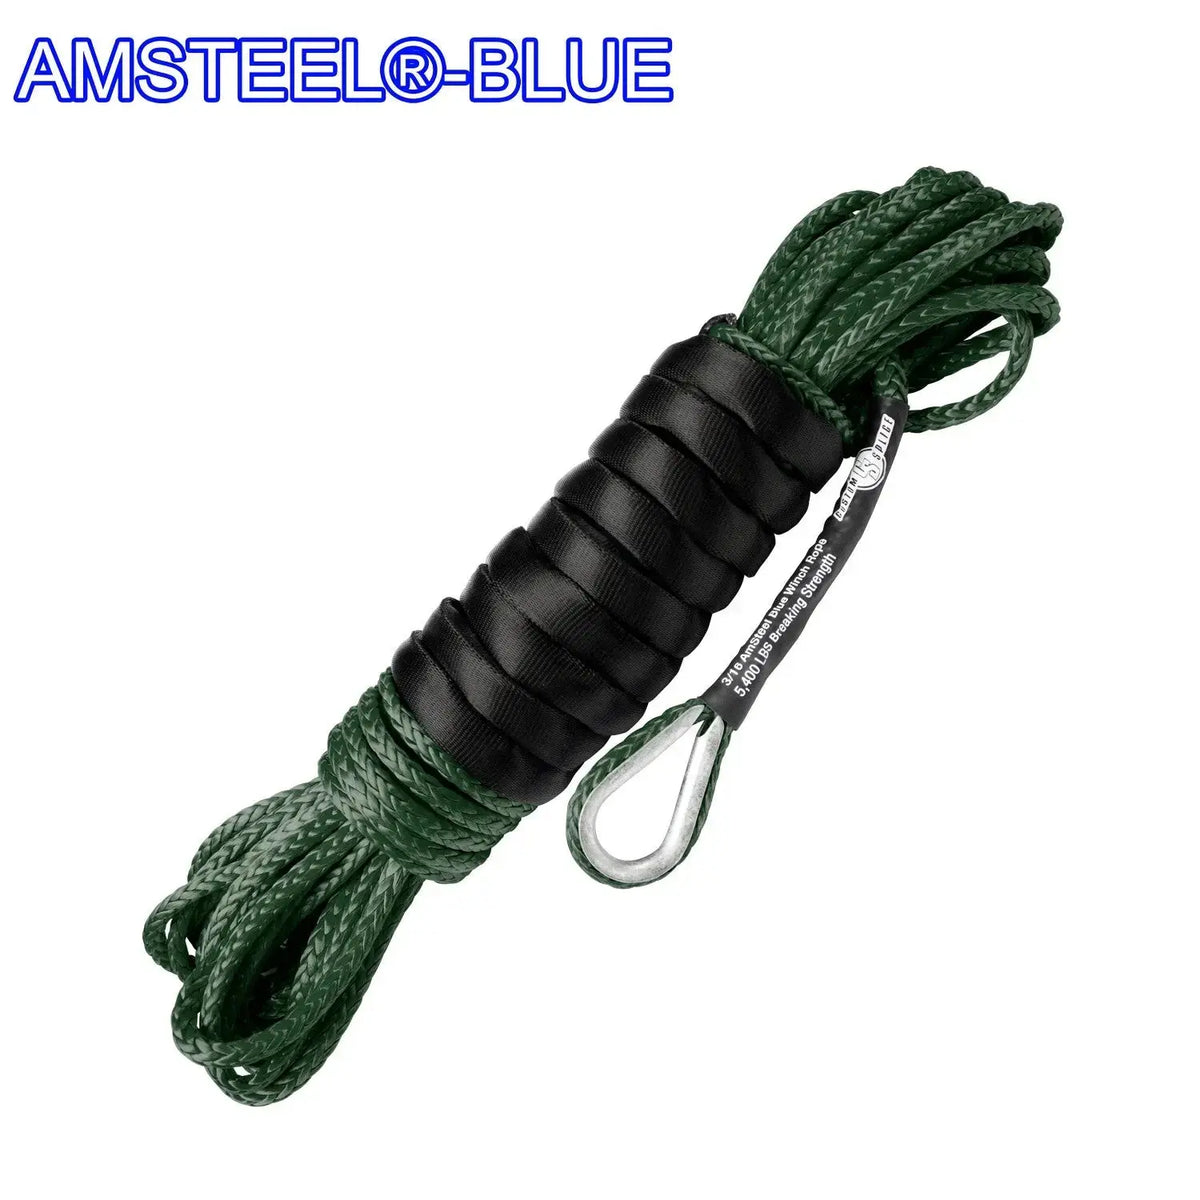 3/16" X 50' Main Line Winch Rope - AmSteel Blue OD-Green-Tube-Thimble-with-Excel-Sling-Hook Custom Splice